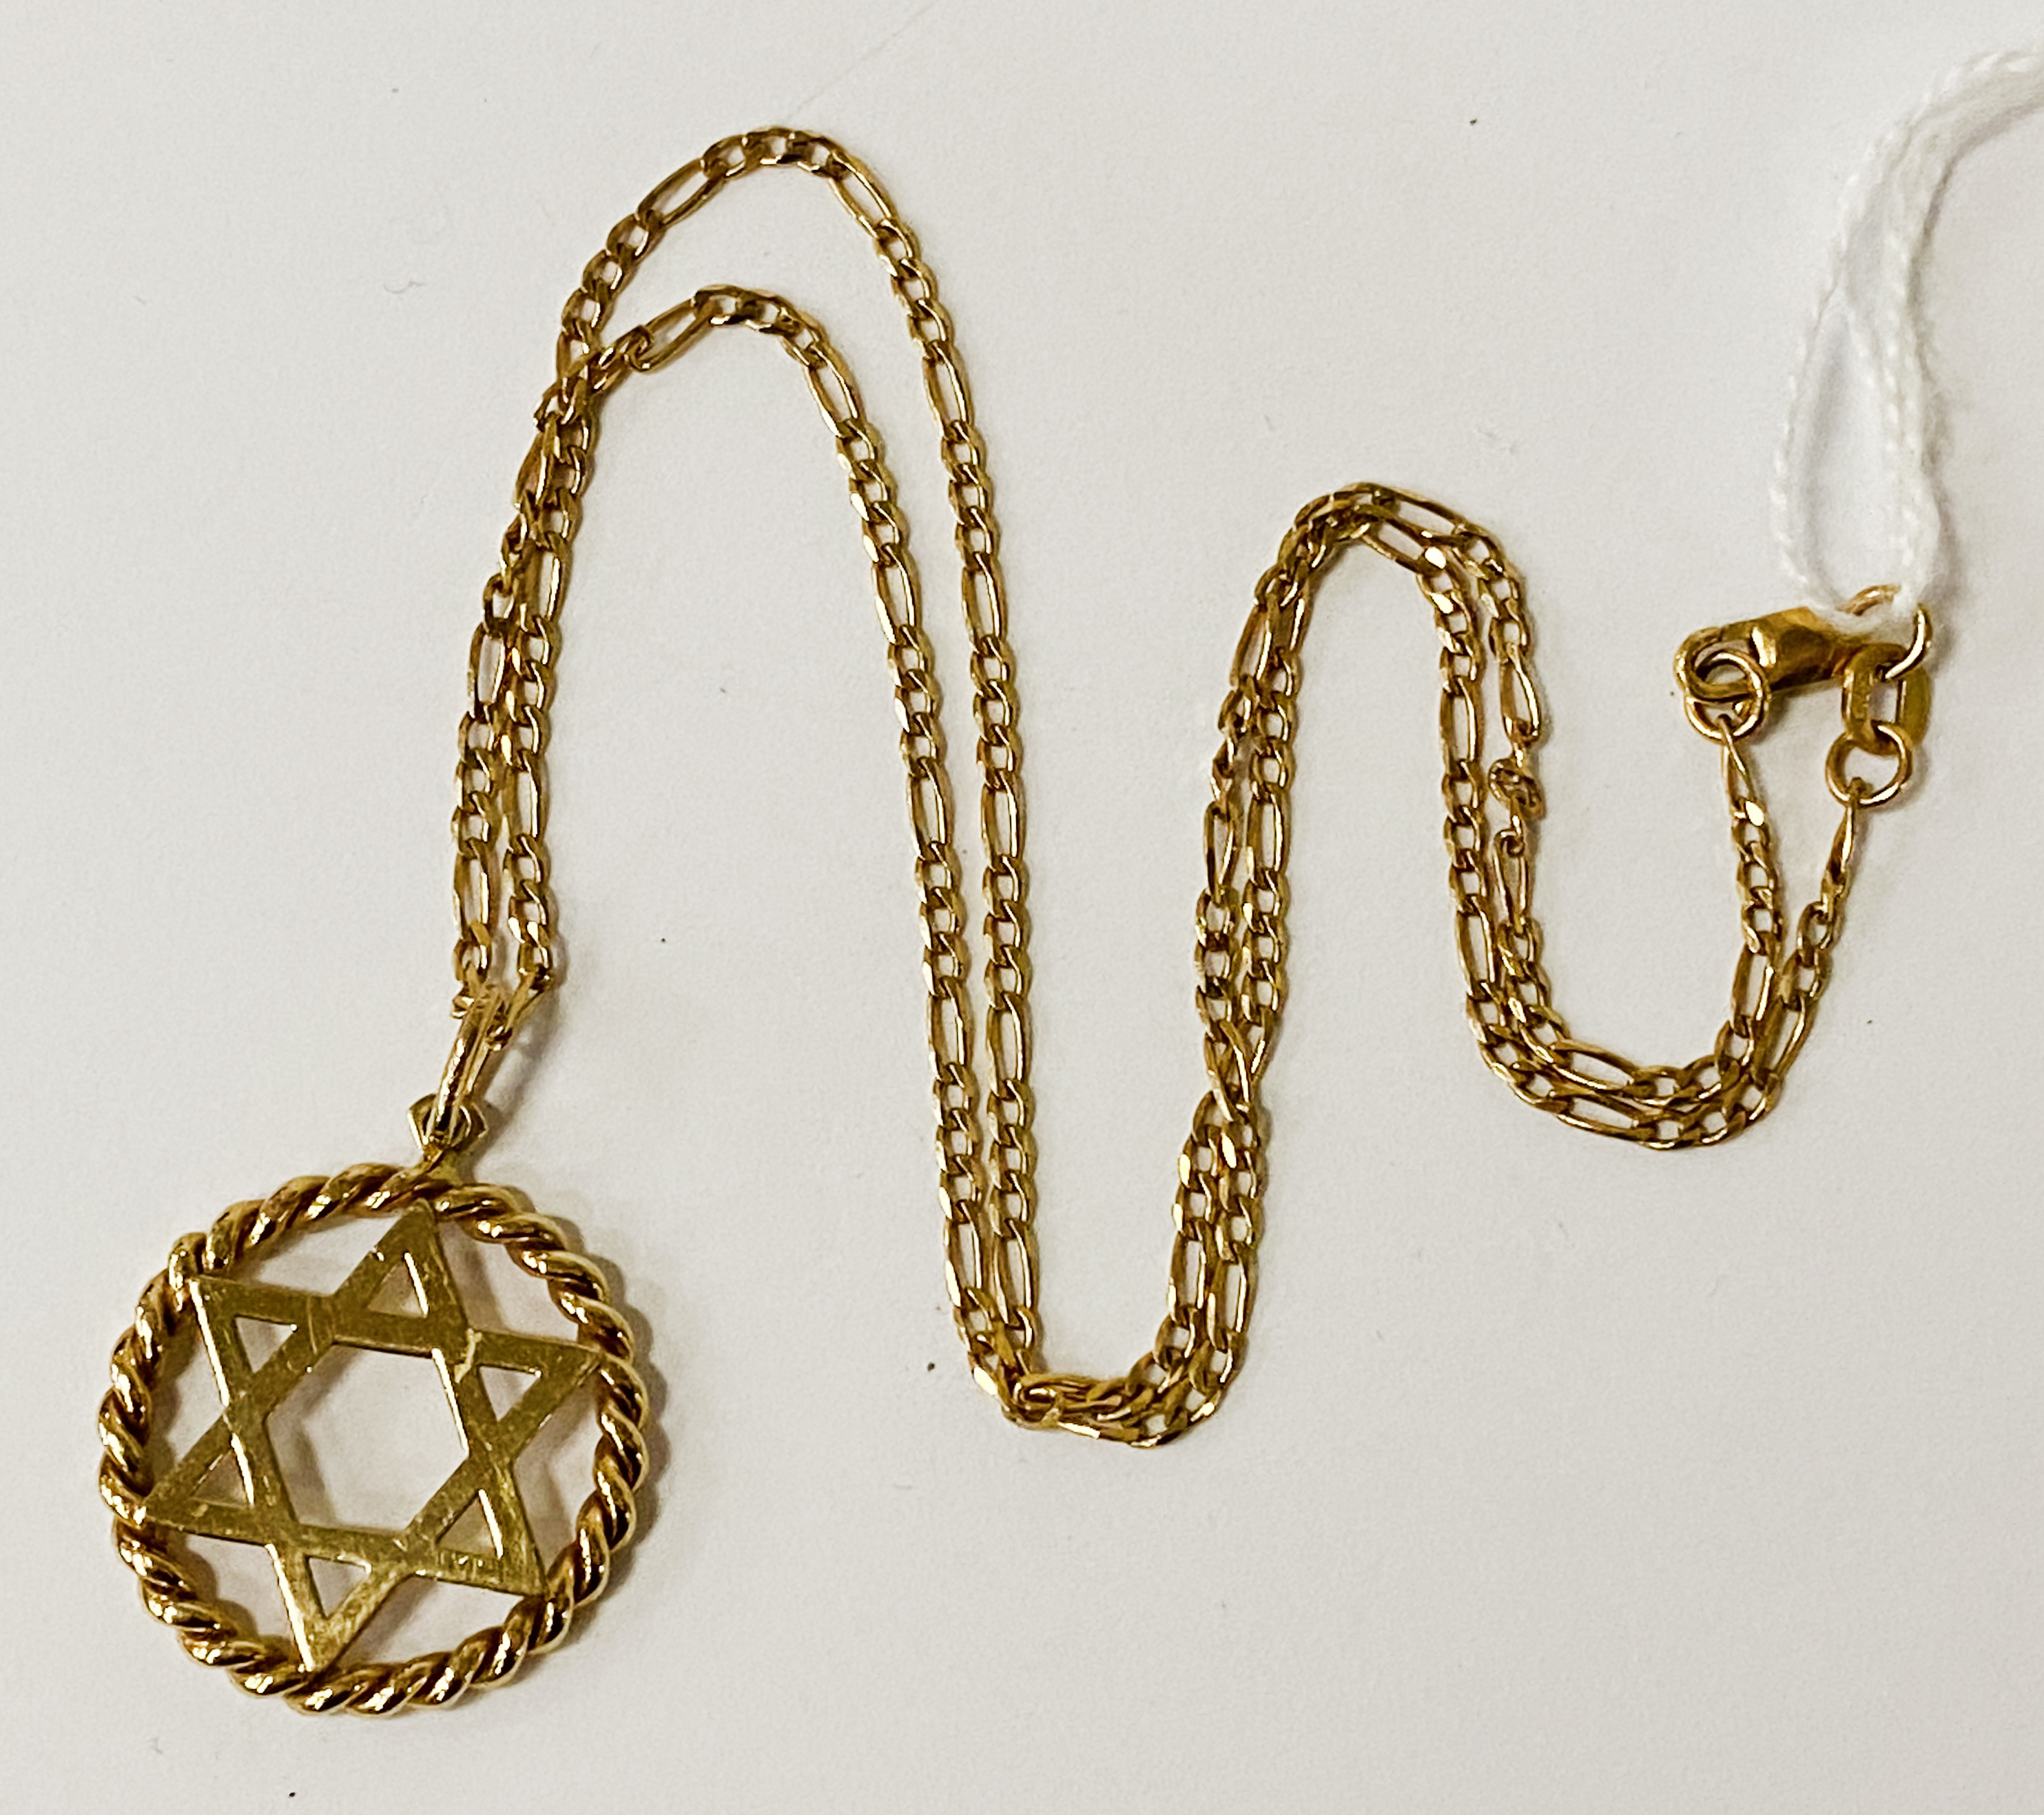 9CT GOLD STAR OF DAVID ON CHAIN -APPROX 5.4 GRAMS